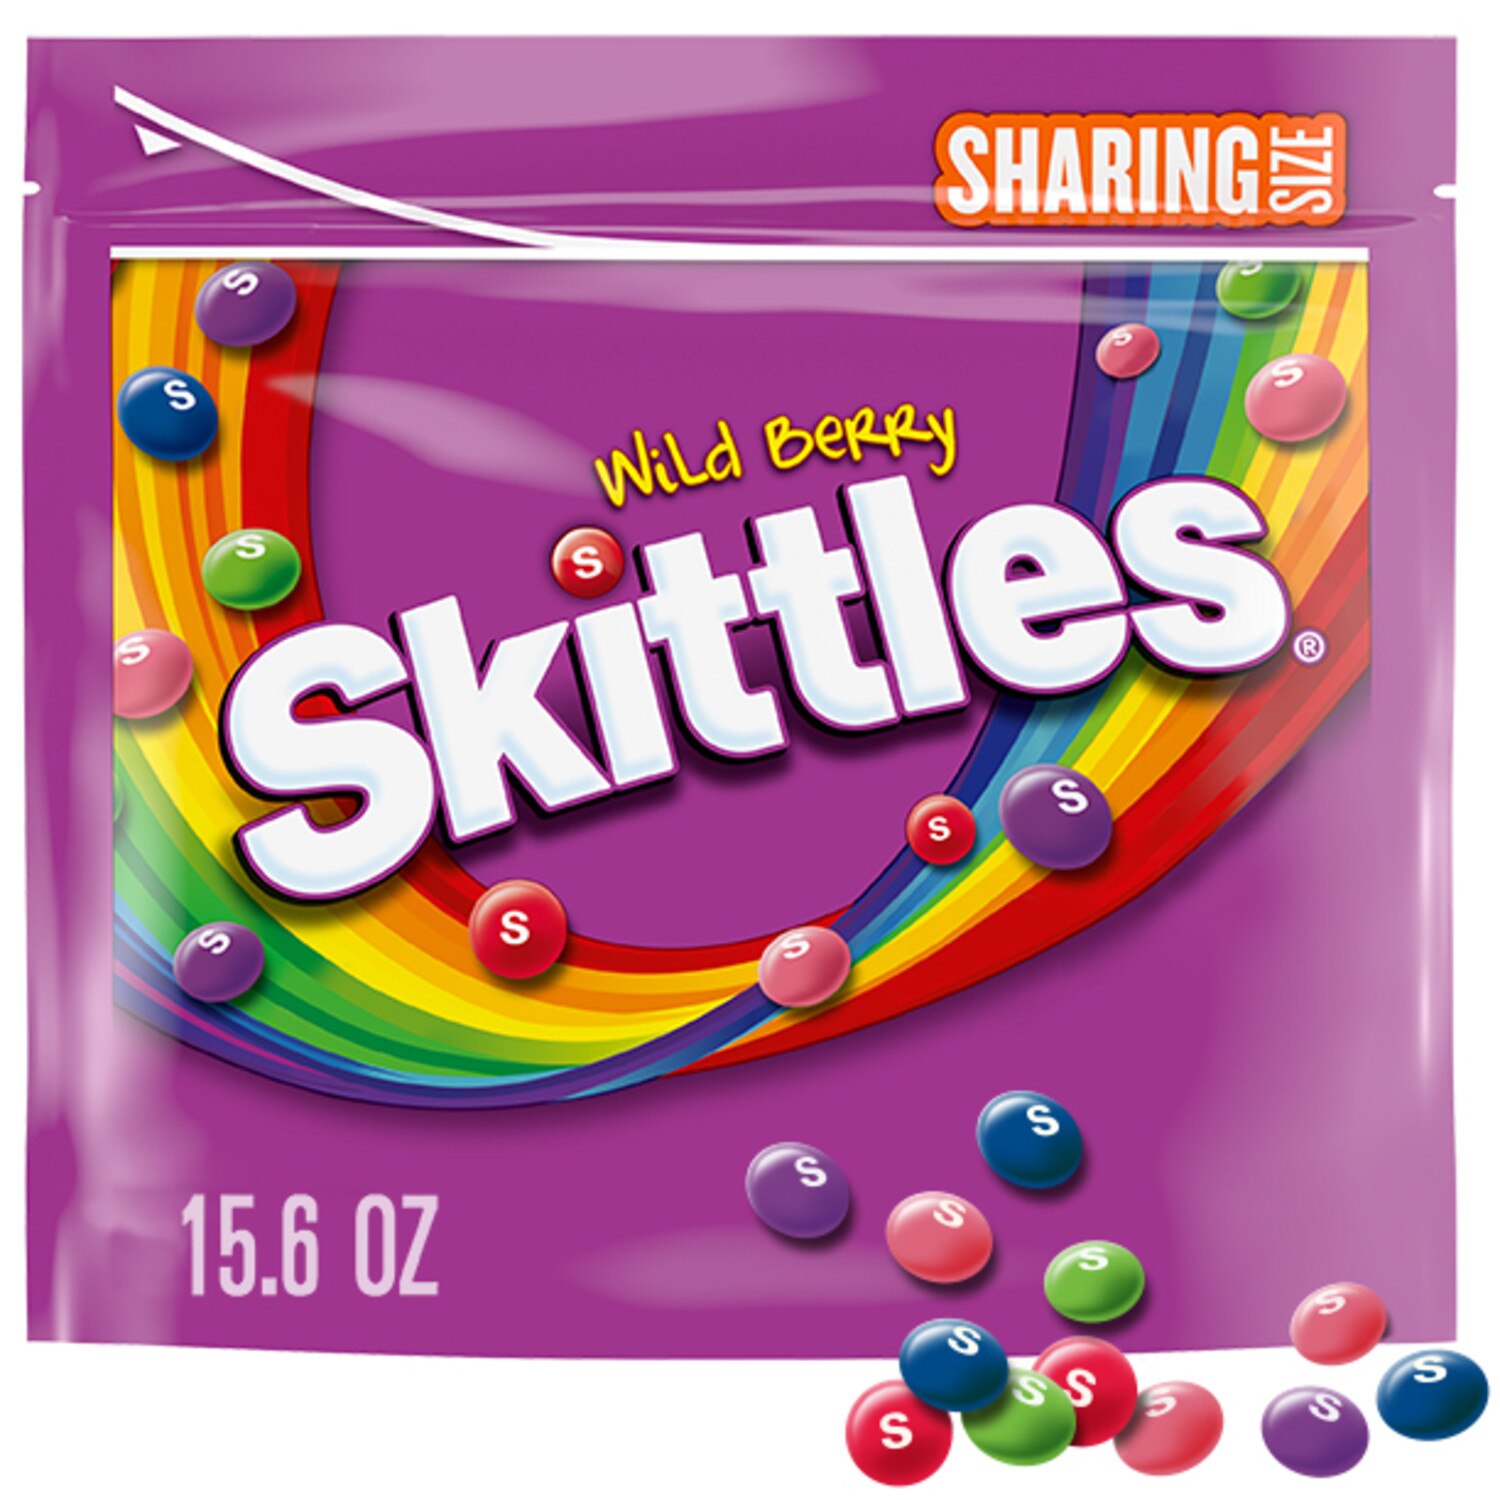 SKITTLES Wild Berry Chewy Candy, Sharing Size, 15.6 oz Bag